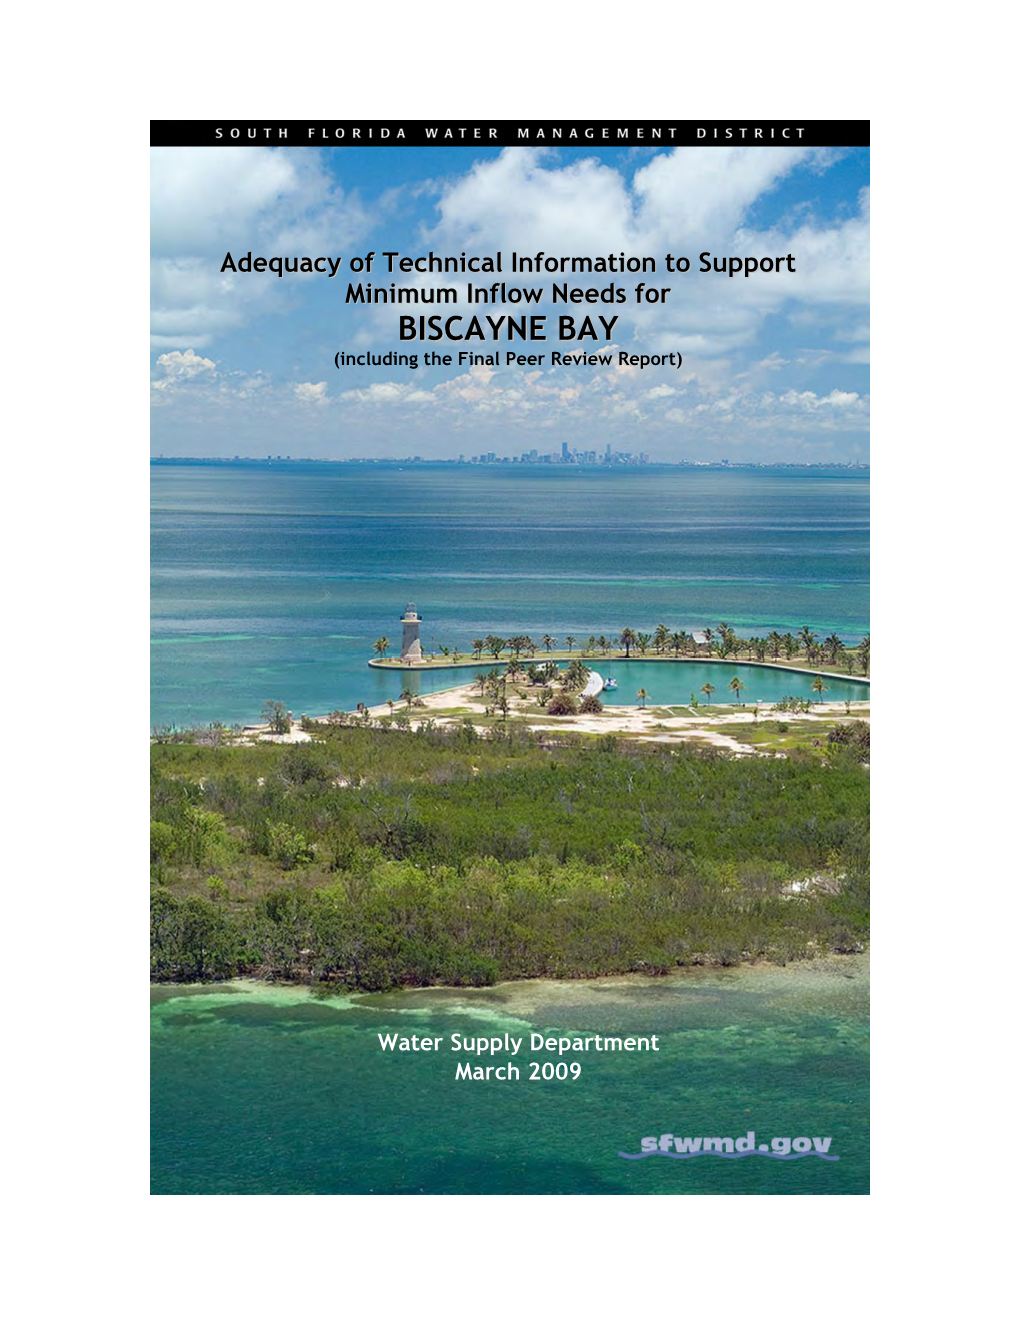 Adequacy of Technical Information to Support Minimum Inflow Needs for BISCAYNE BAY (Including the Final Peer Review Report)